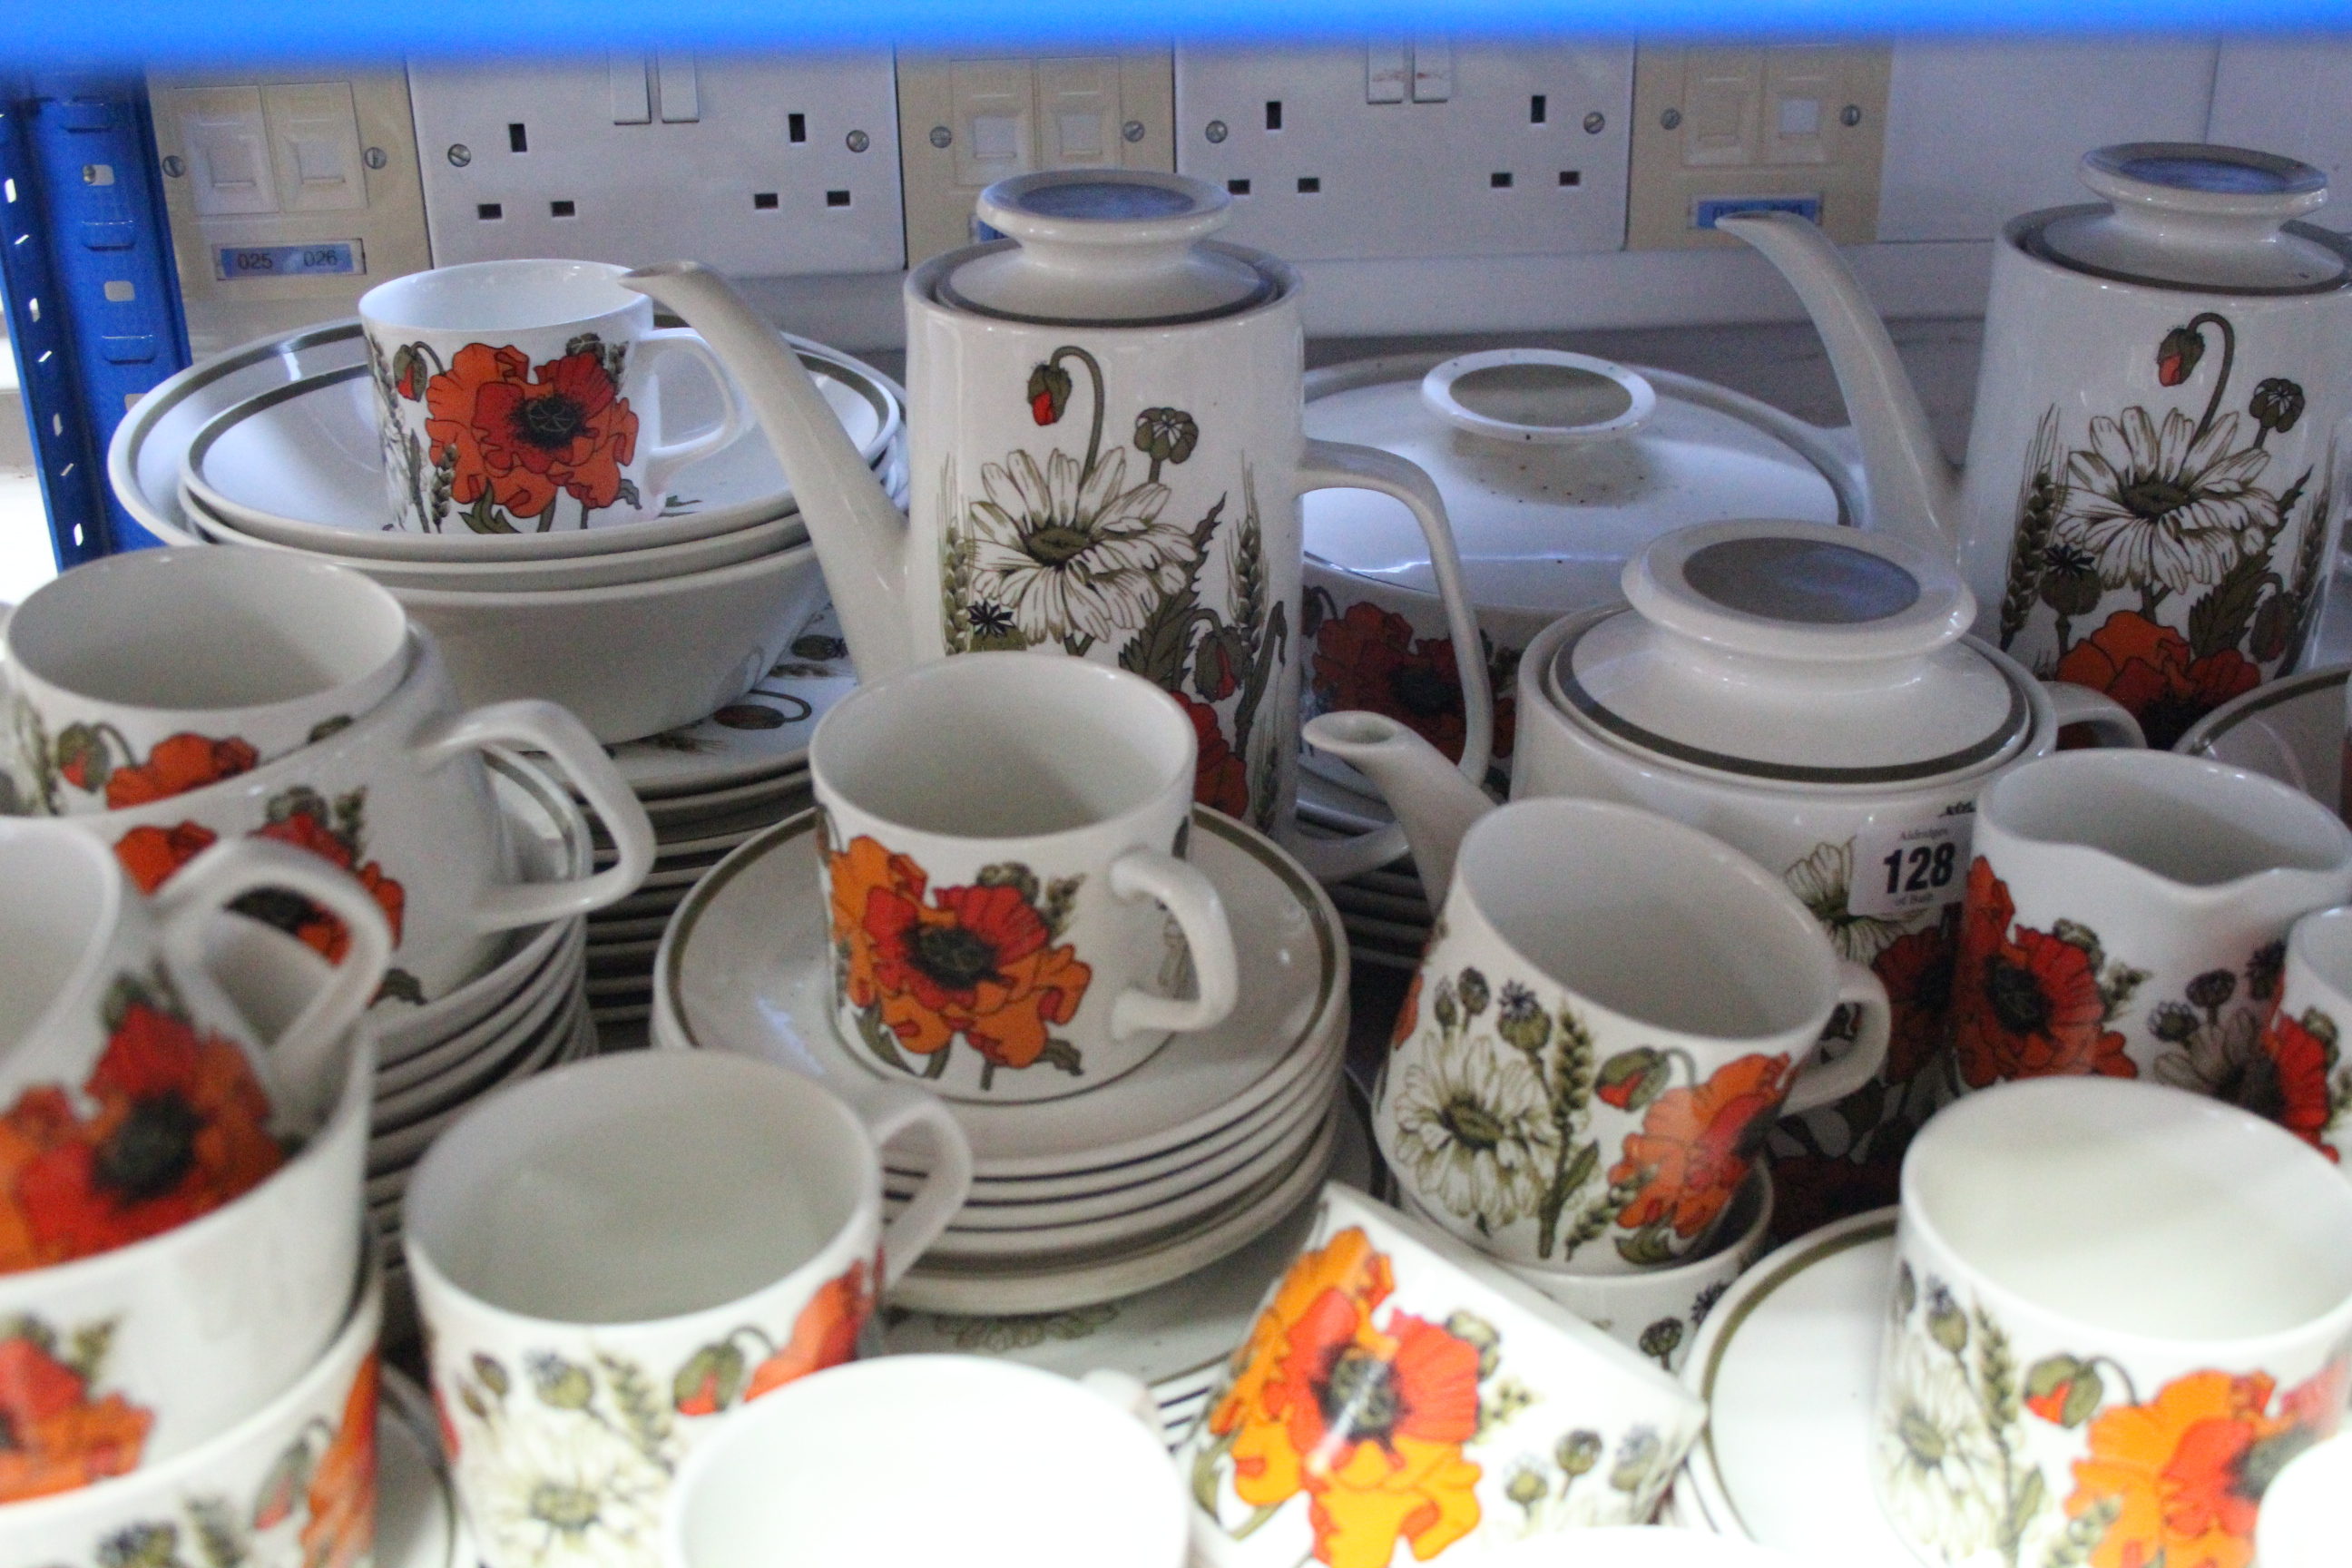 Approximately sixty various items of Meakins “Poppy” pattern dinner, tea & coffeware. - Image 3 of 4